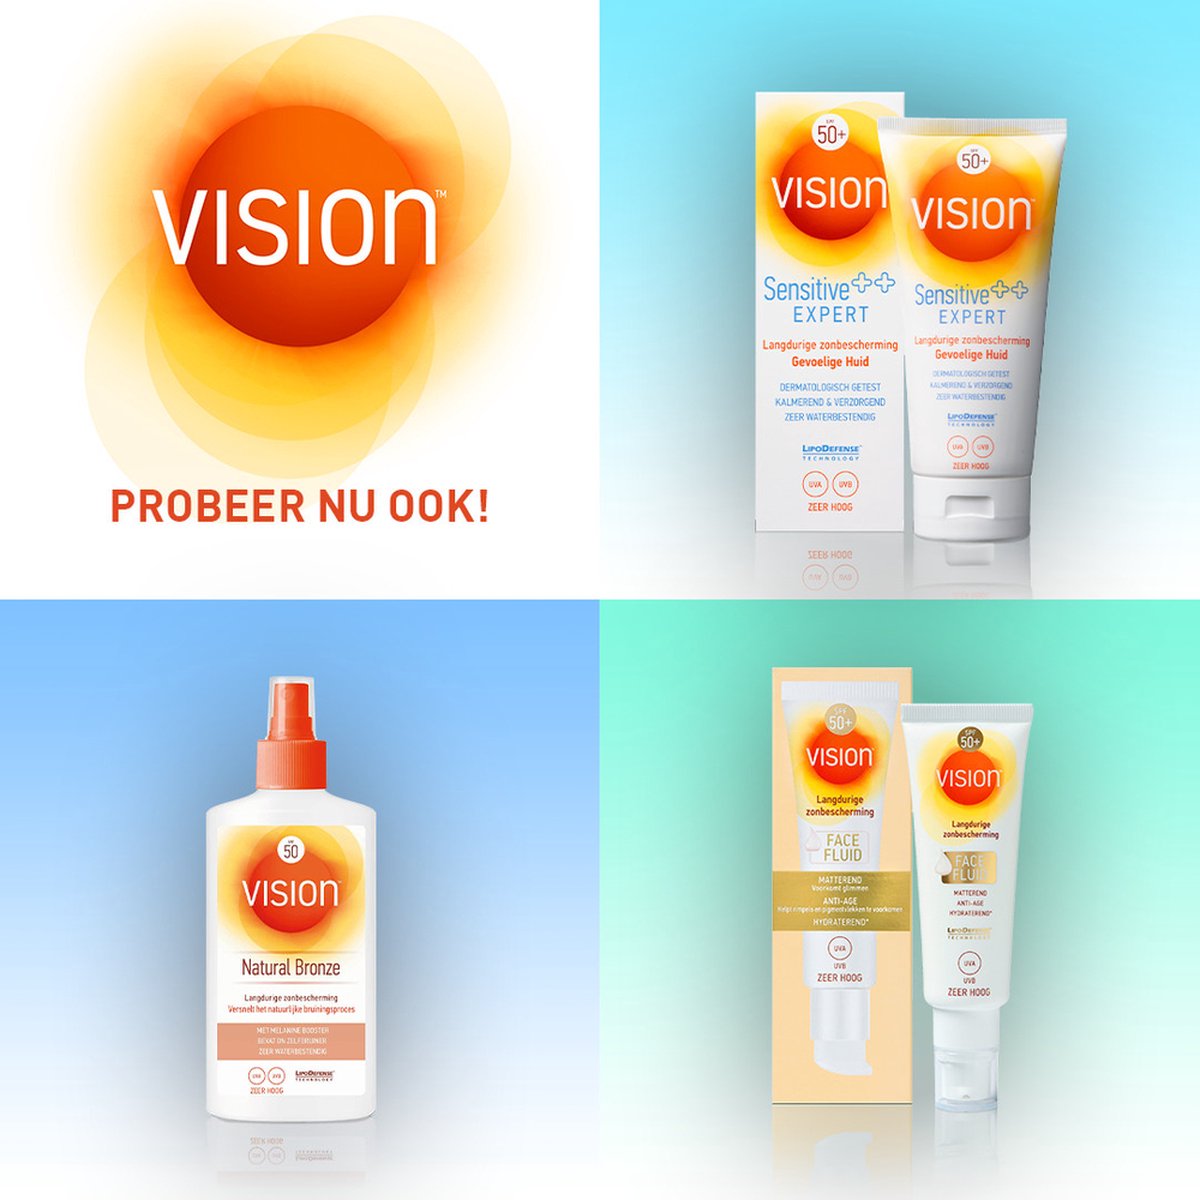 bros Puur beest Vision Every Day Sun Protection - Zonnebrand - SPF 50 - 180 ml | bol.com